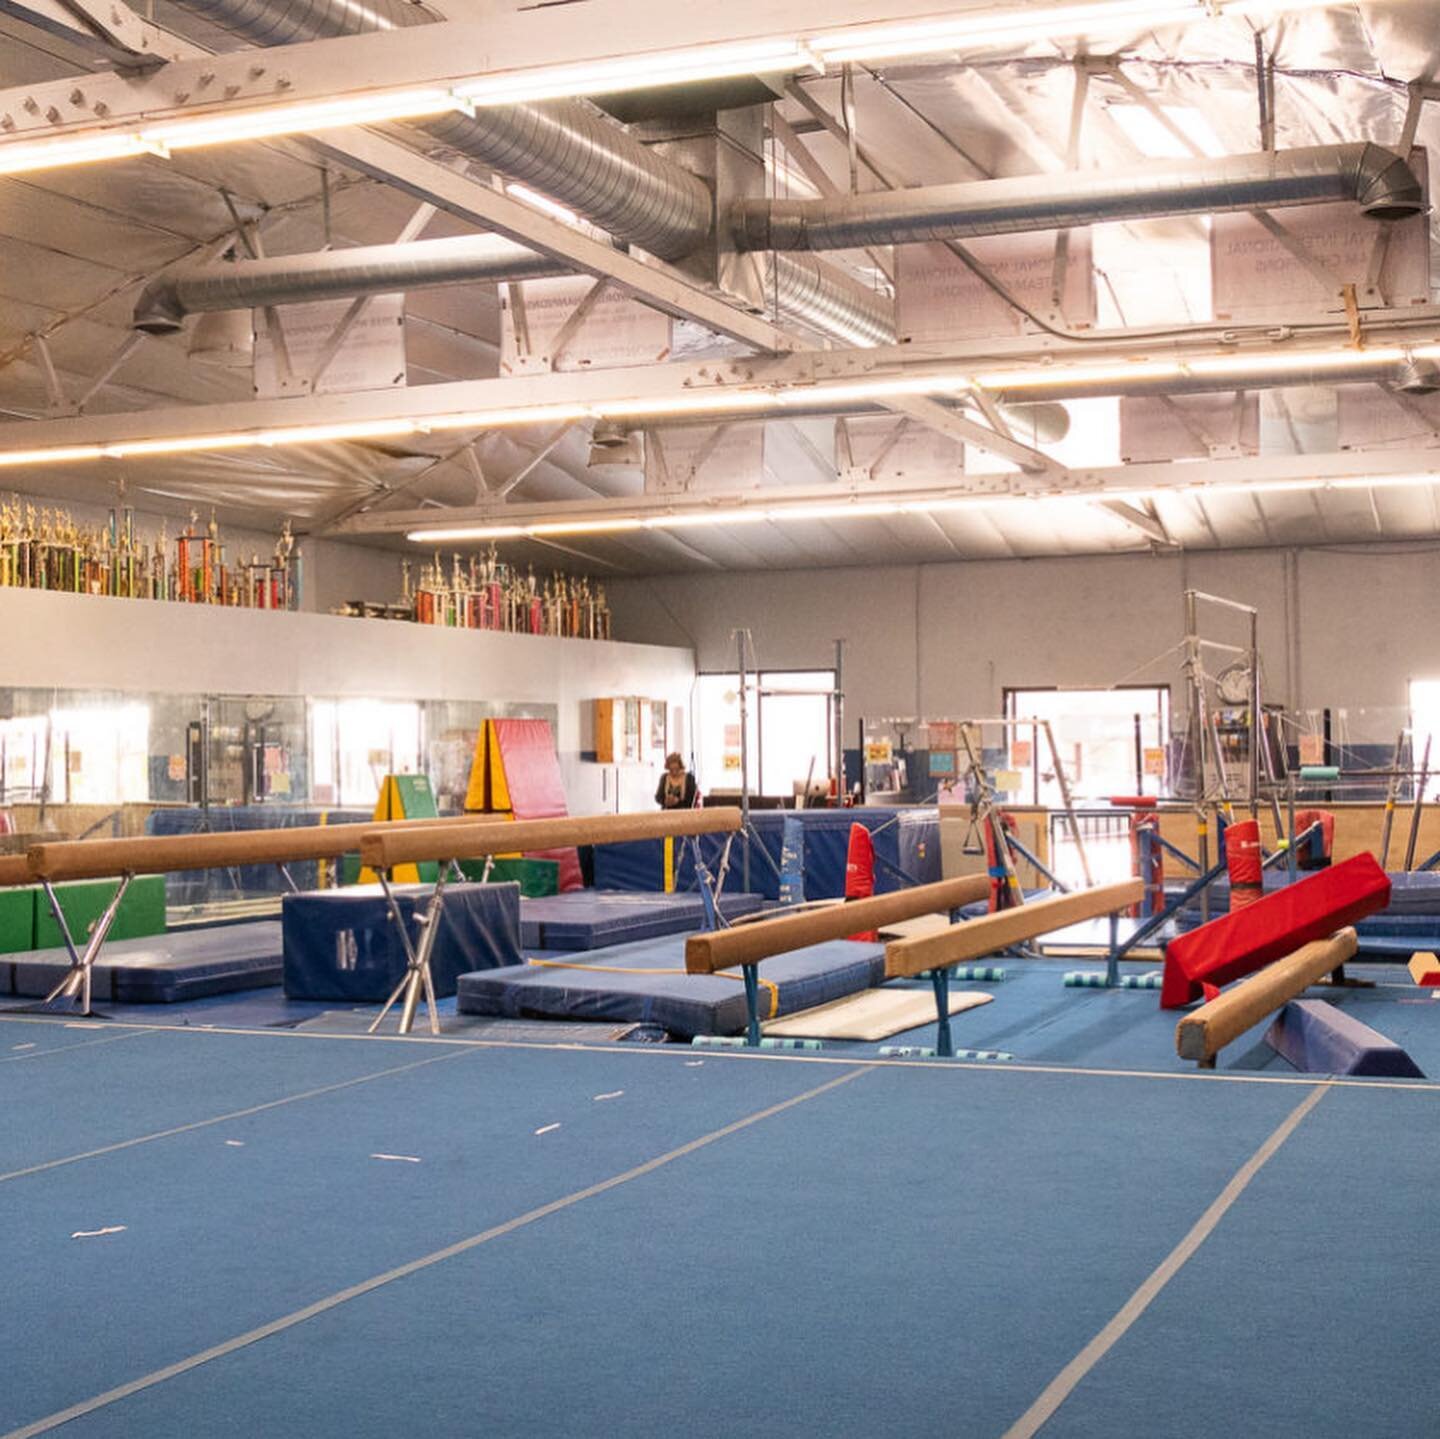 Jump 💫 Visit Downtown Alhambra&rsquo;s gymnastics academy!

👉 @paykegymnasticsacademy 

Payke Gymnastics Academy
Gymnastics Center offers classes in all Olympic gymnastics events, from beginner to competitive levels.

PAYKE GYMNASTICS ACADEMY
📍 10